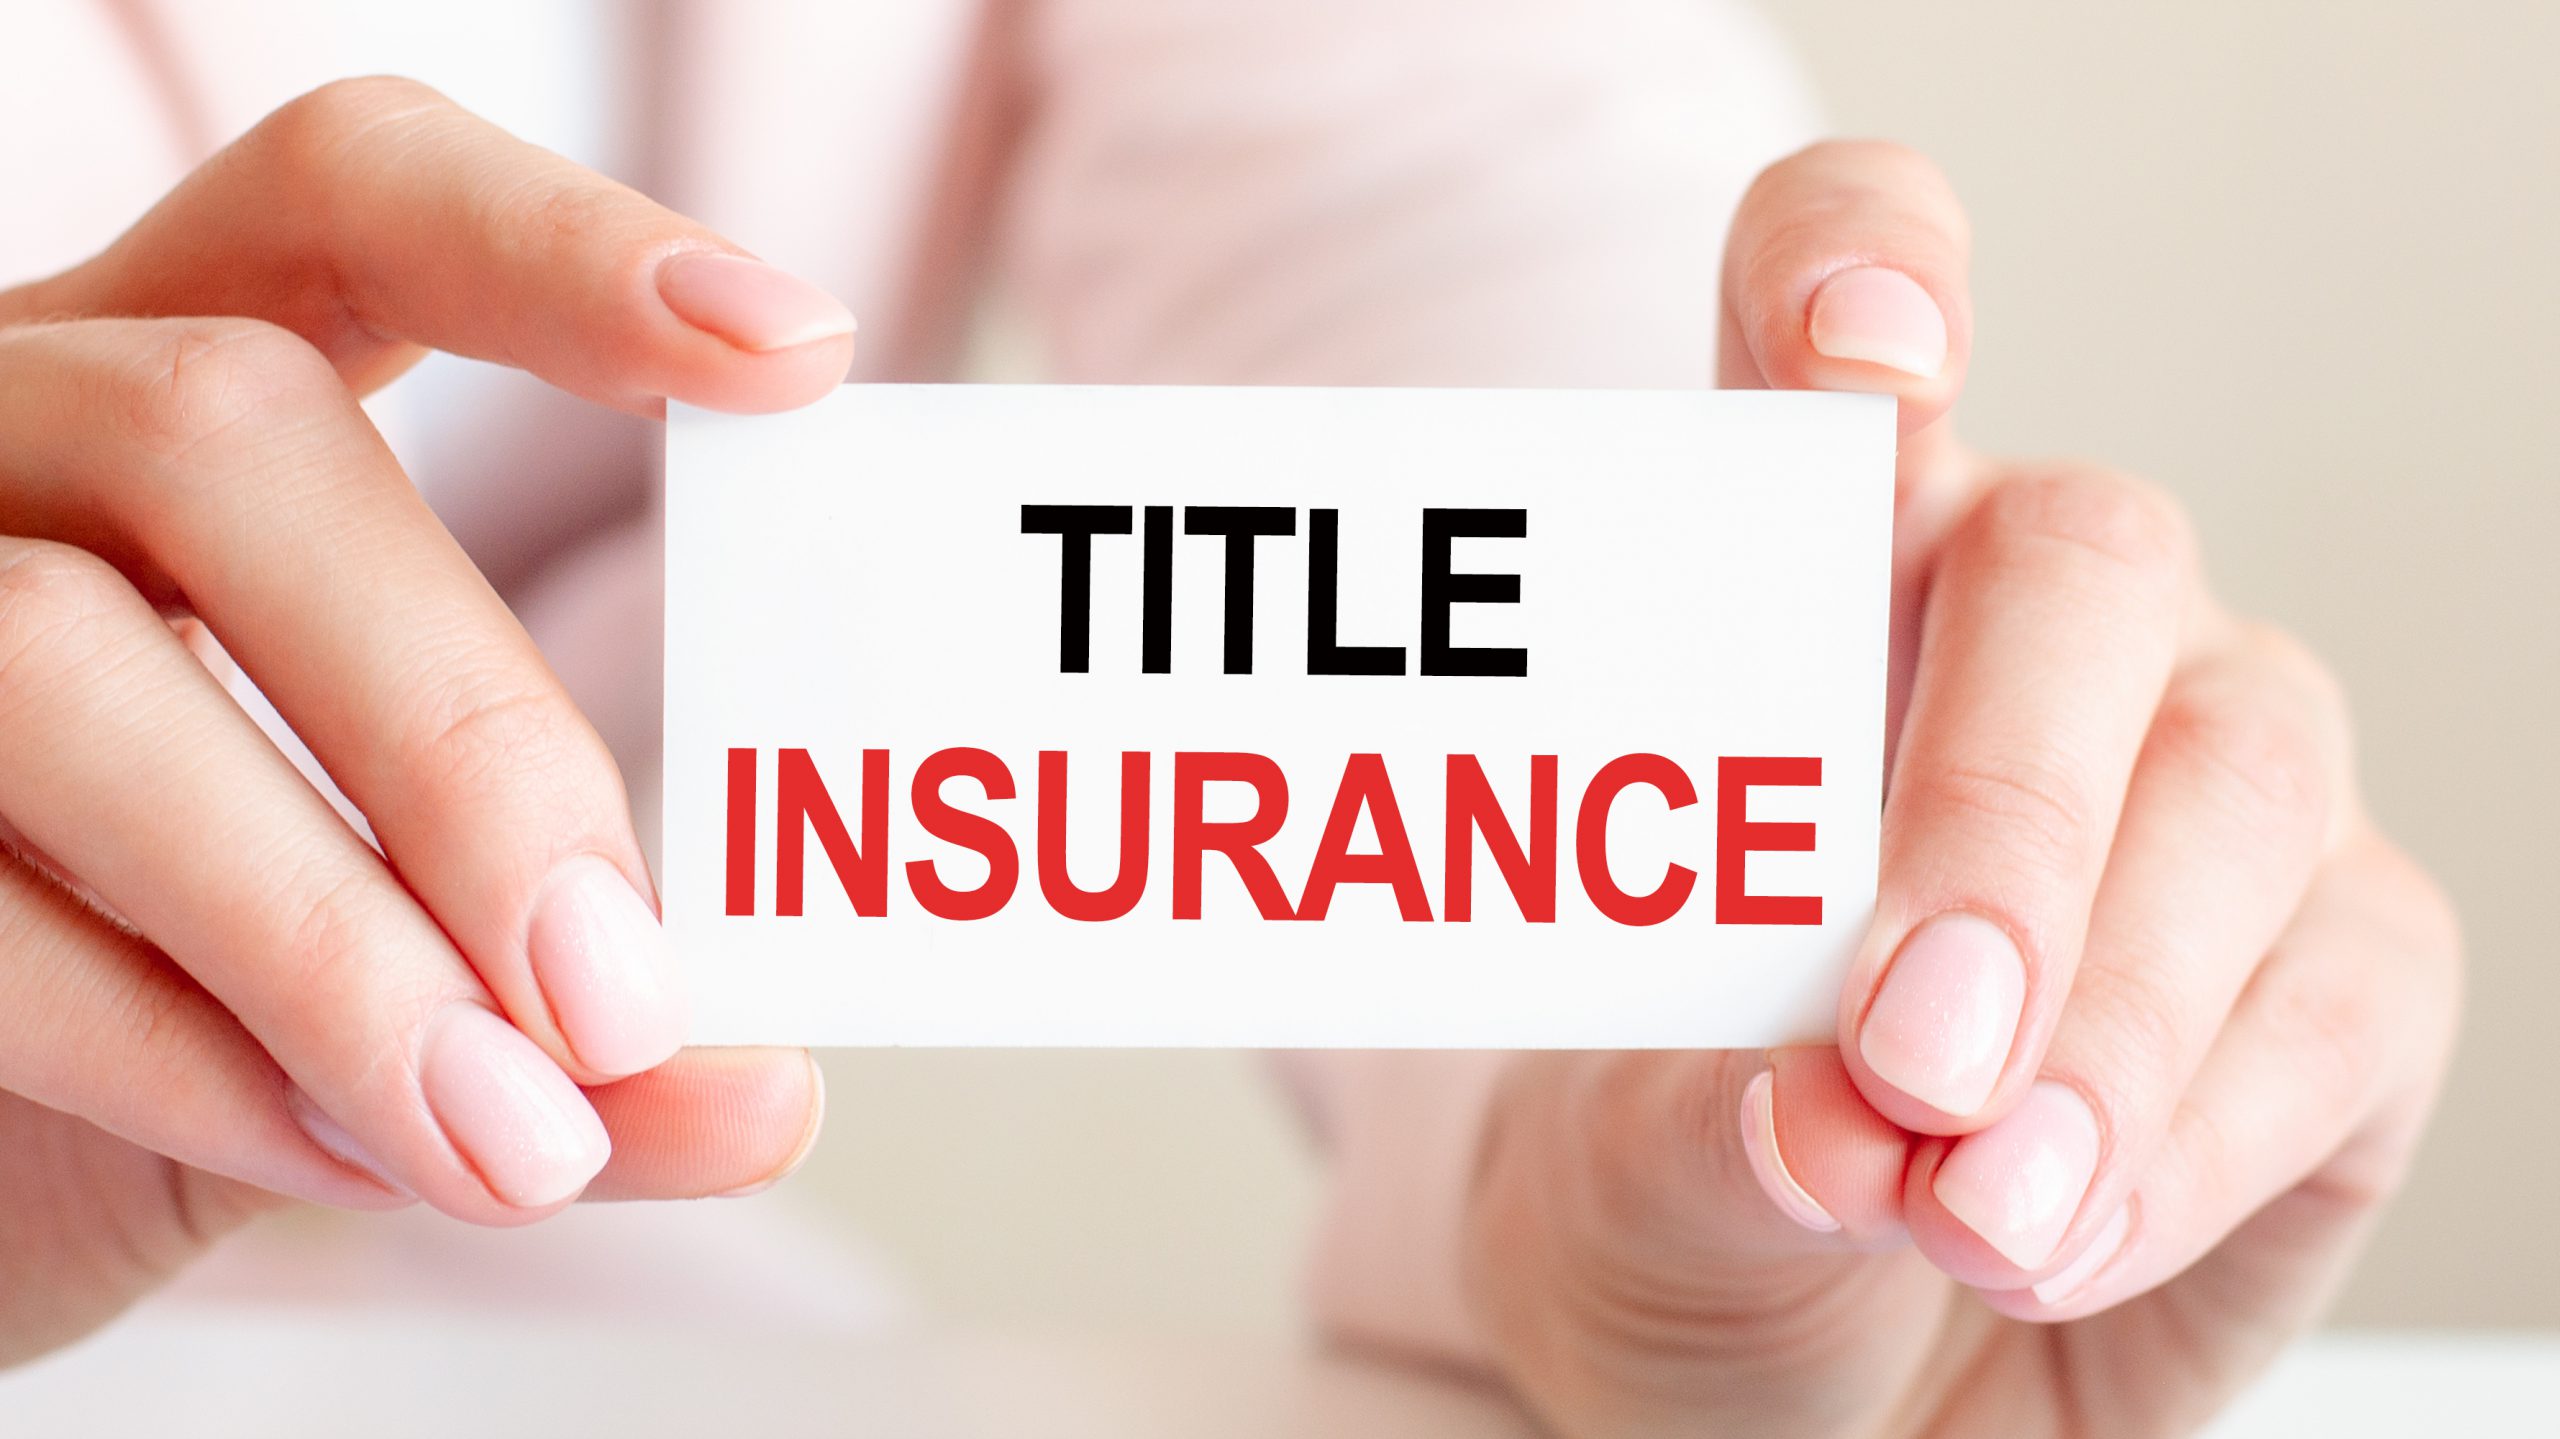 Some Important Points To Know About Title Insurance